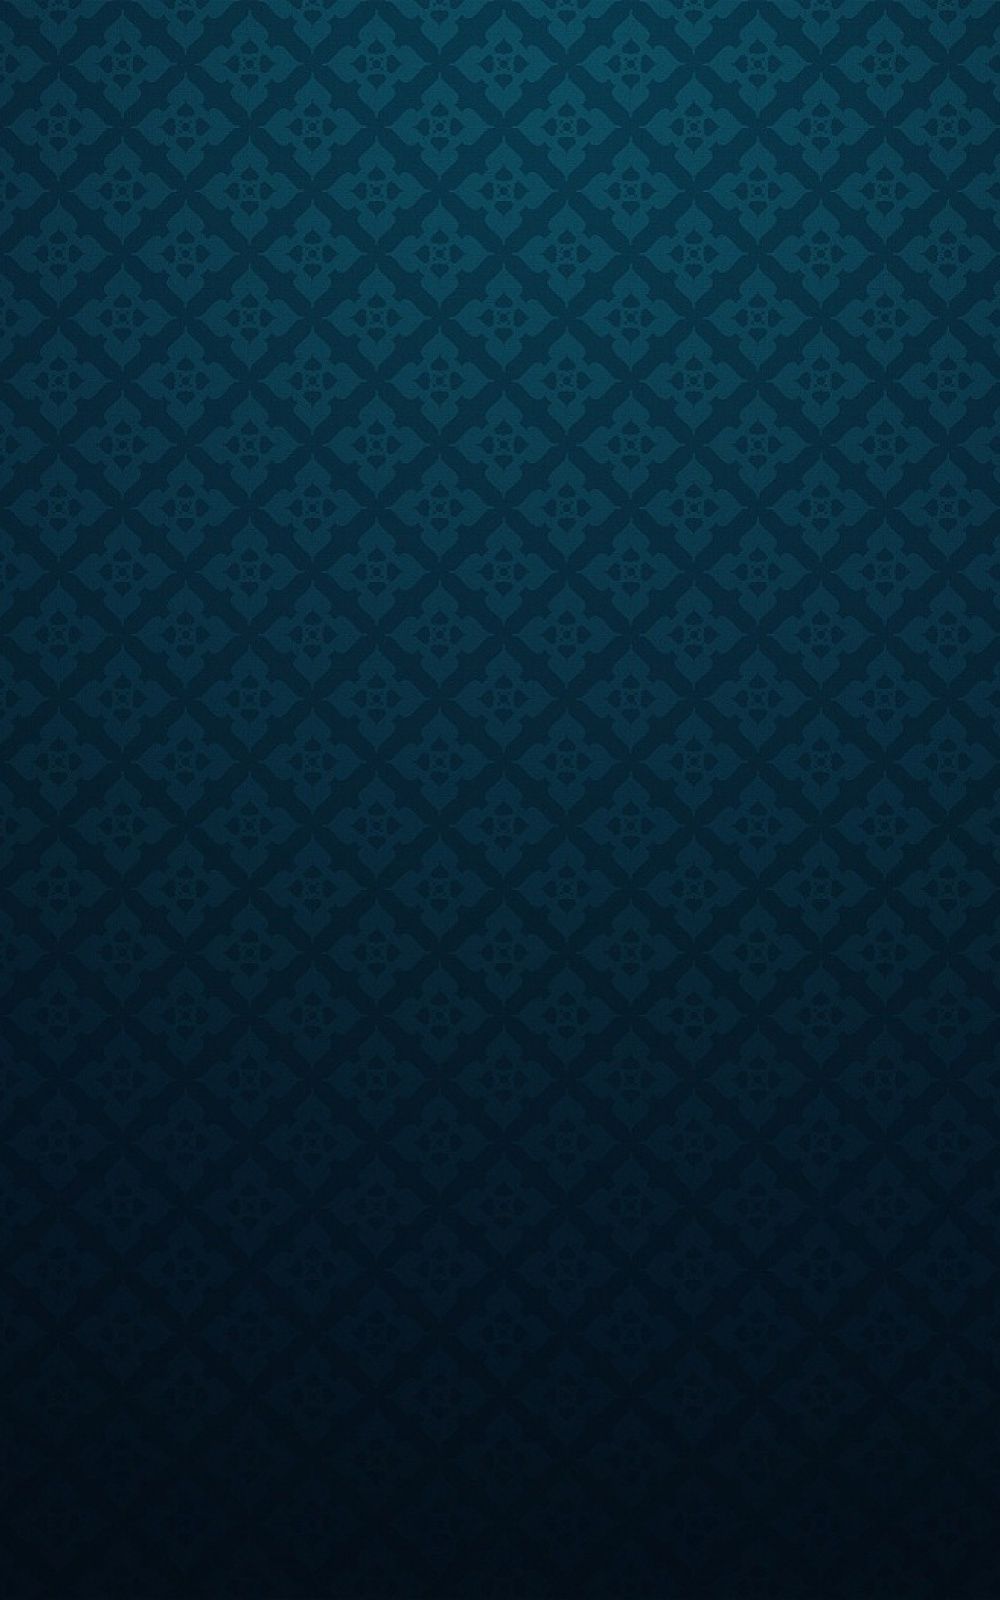 Free download Blue Navy Pattern Android Wallpaper download